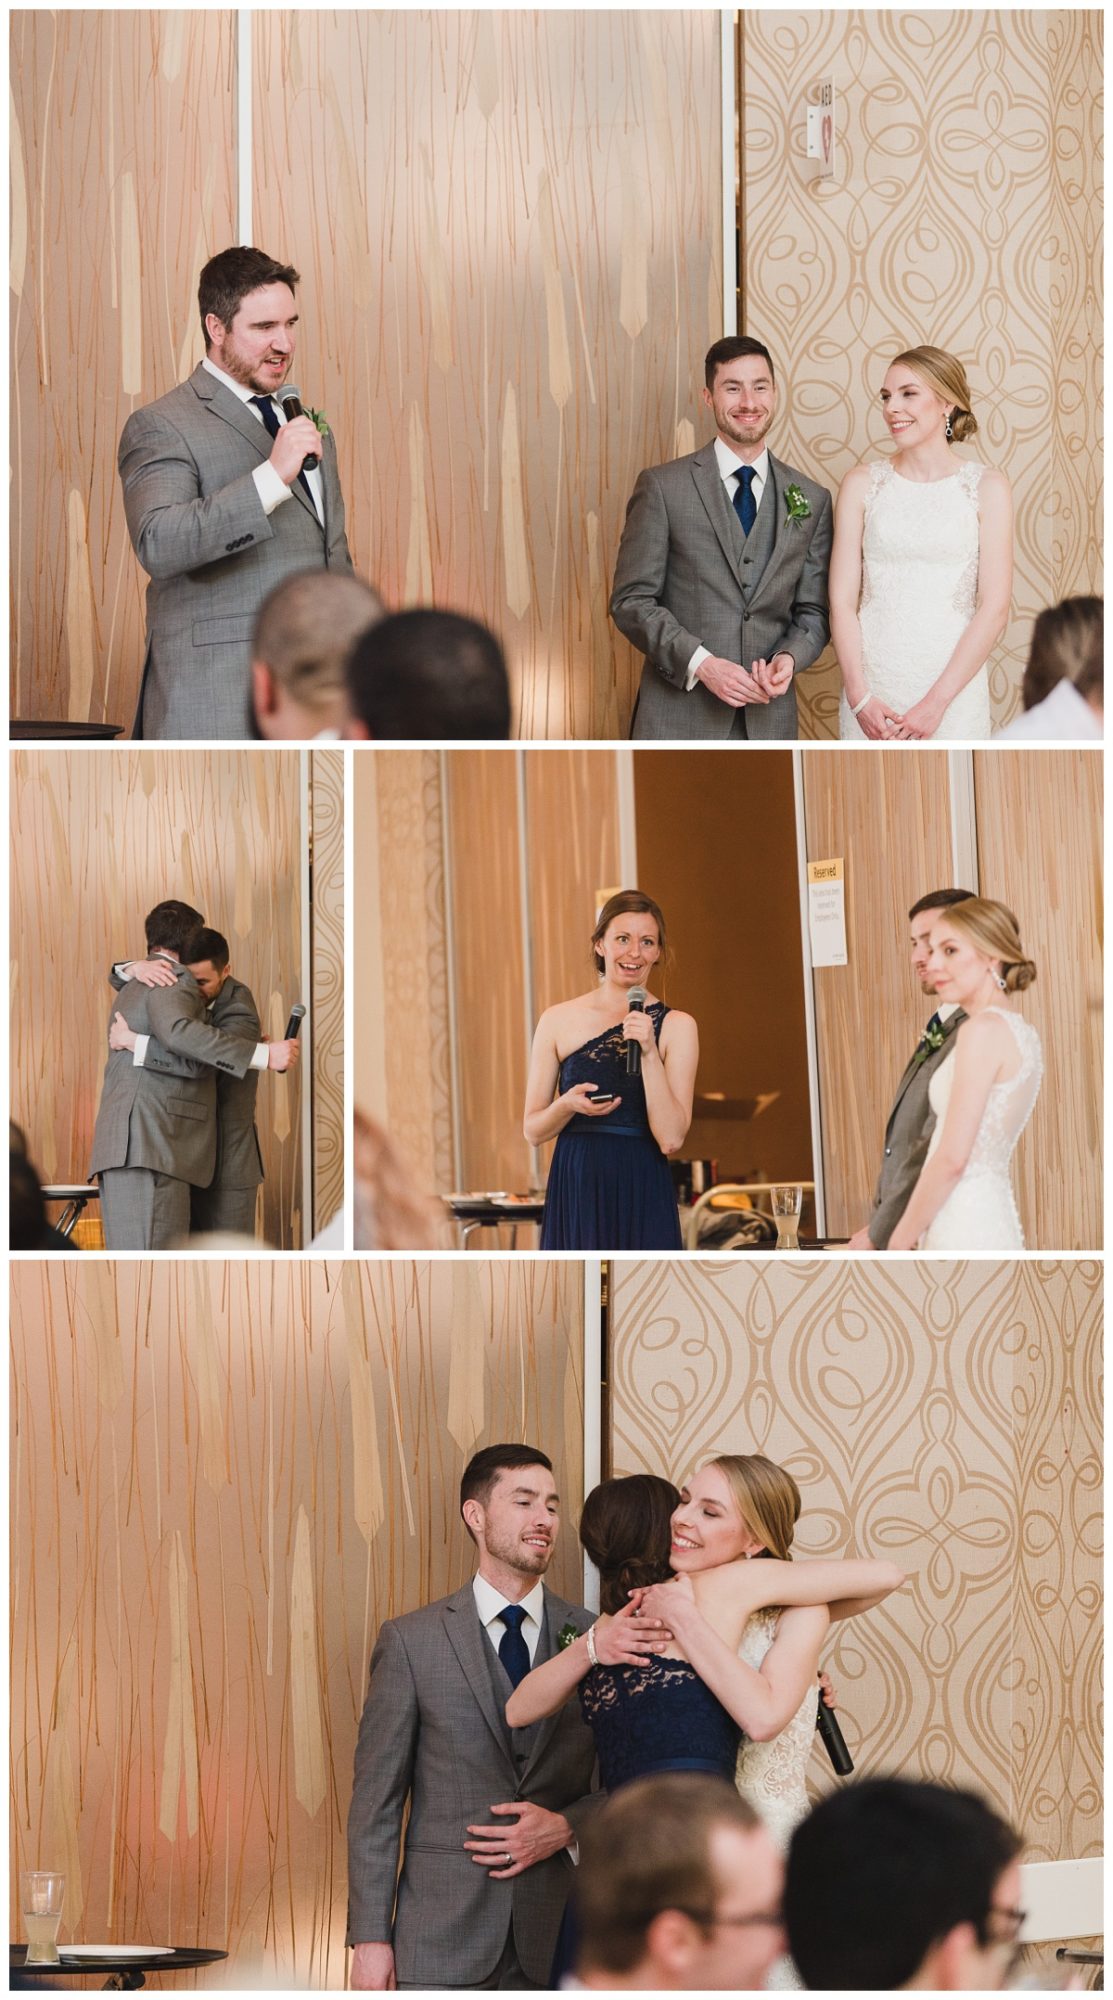 Scenes from speeches from best man and maid of honor, wedding photography by Sandra Grunzinger Photography